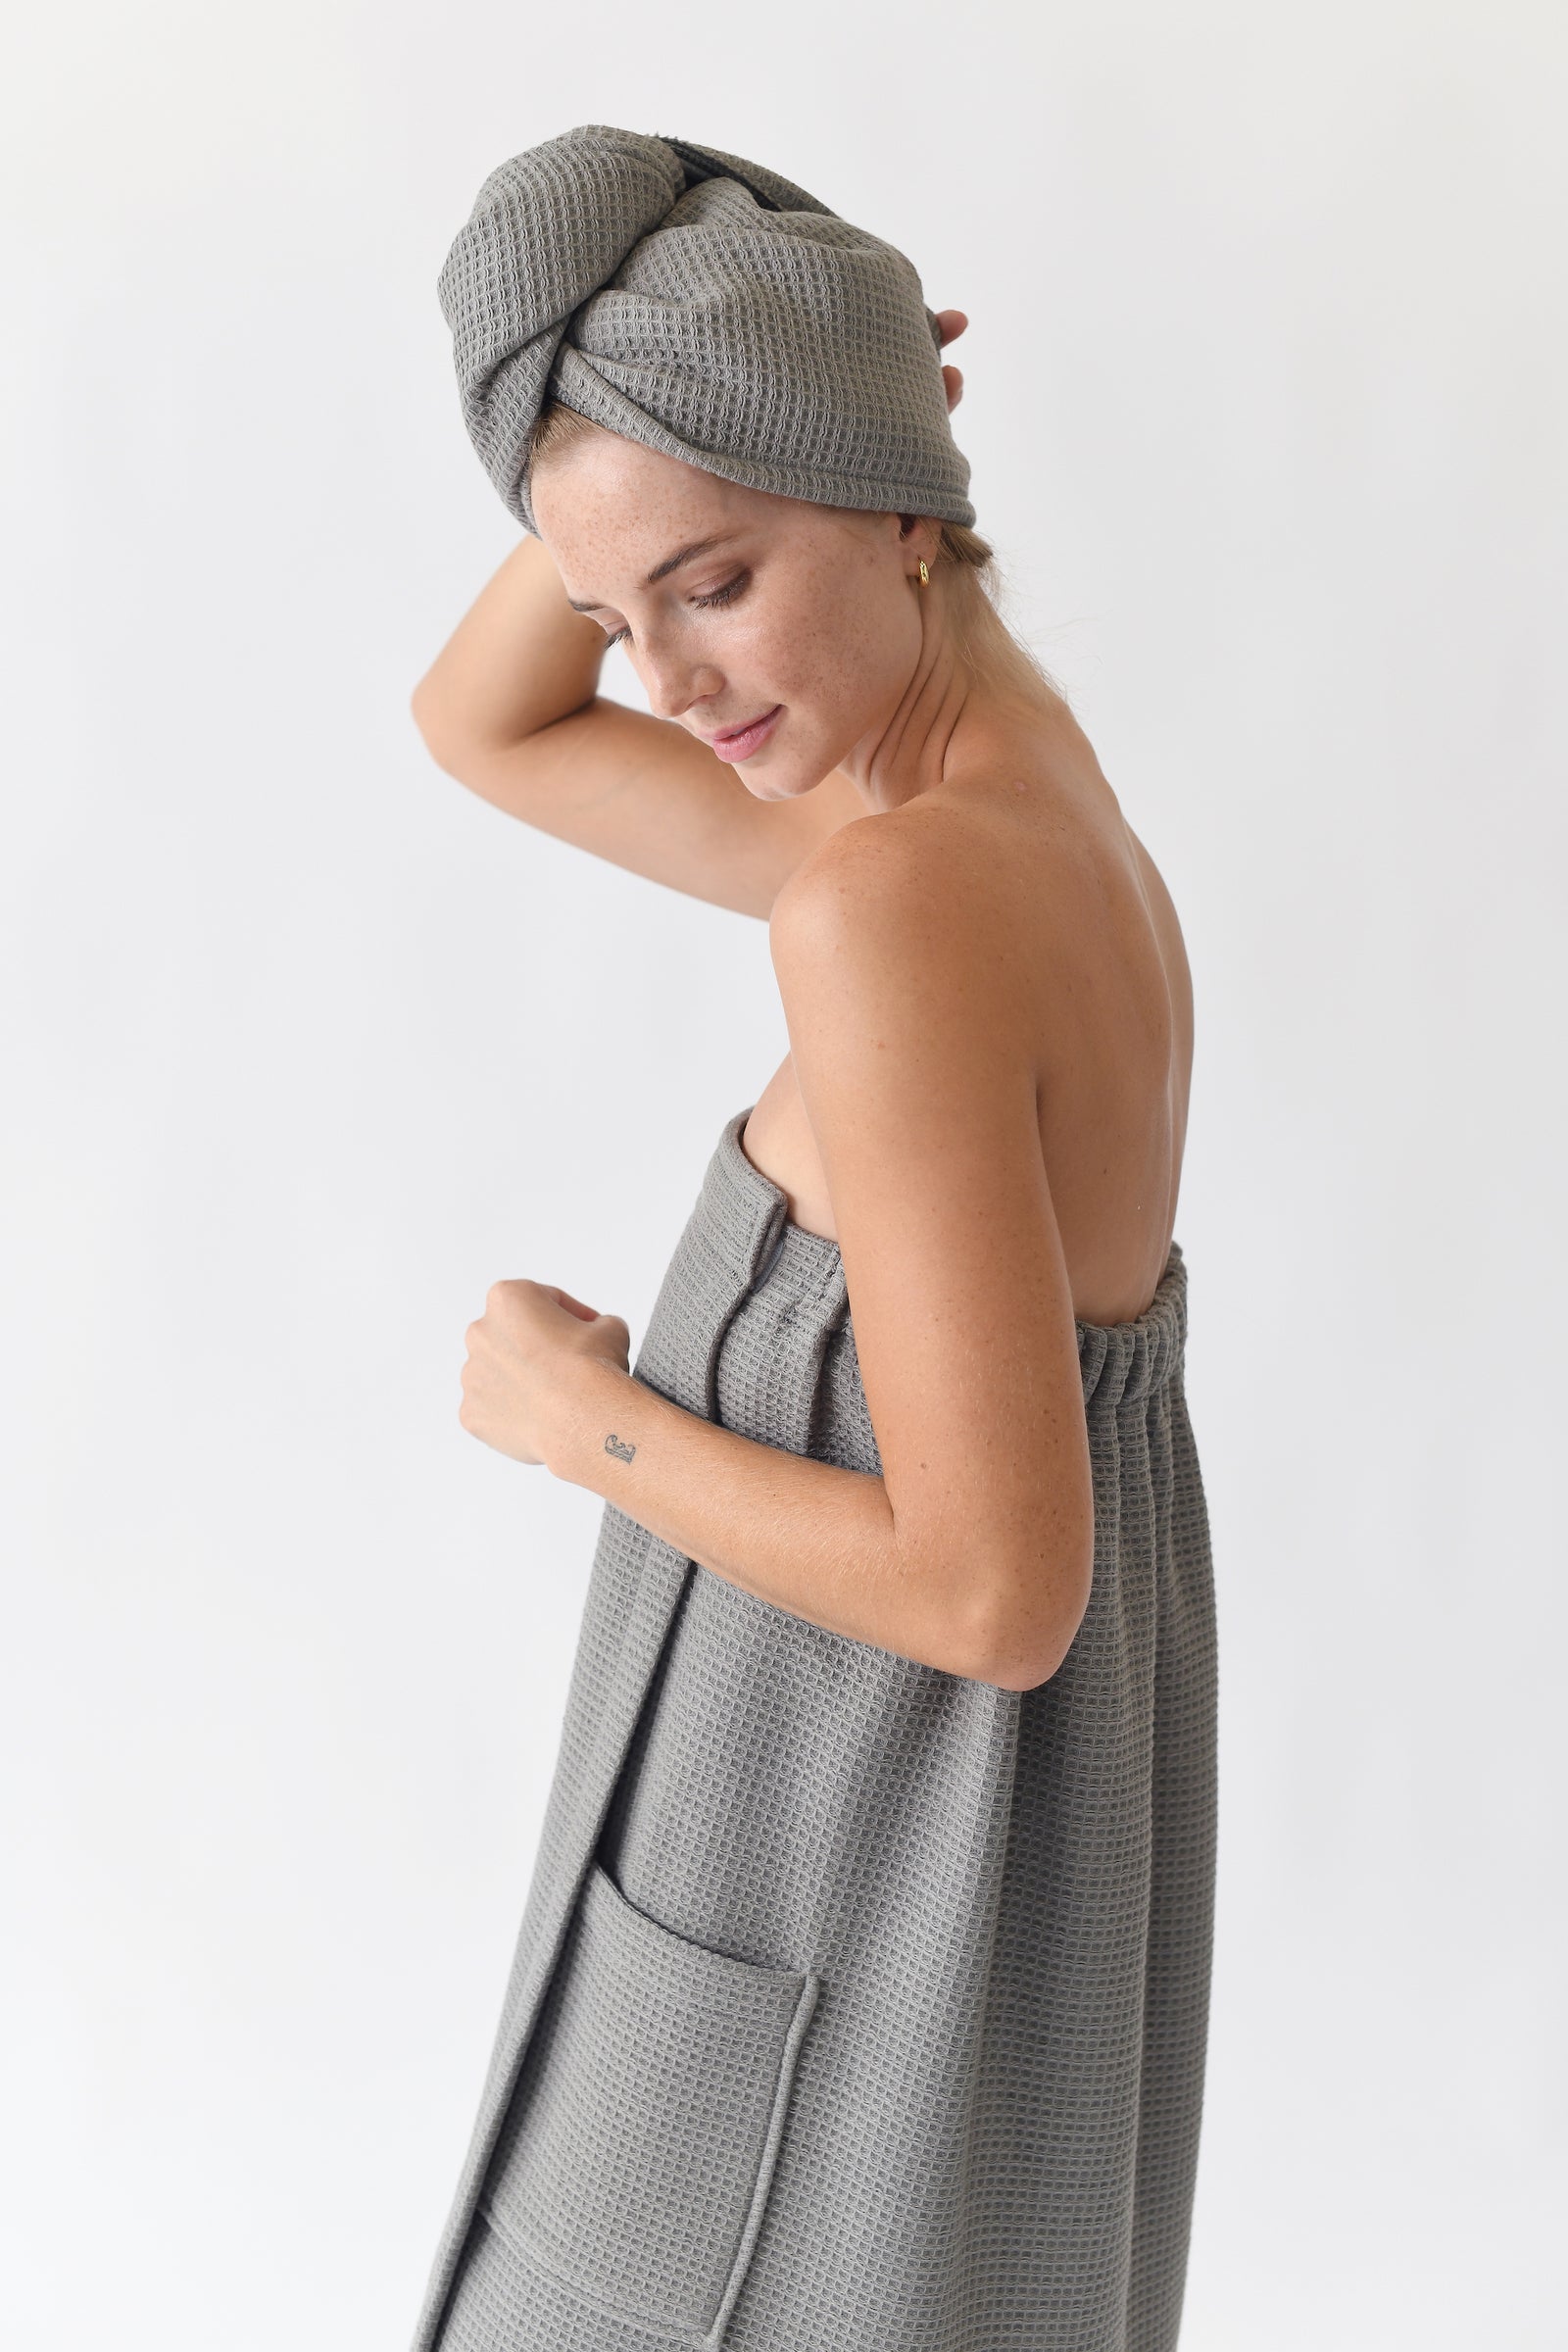 Charcoal Waffle Bath Wrap. The bath wrap is shown being worn by a woman. Photo was taken with a white background.